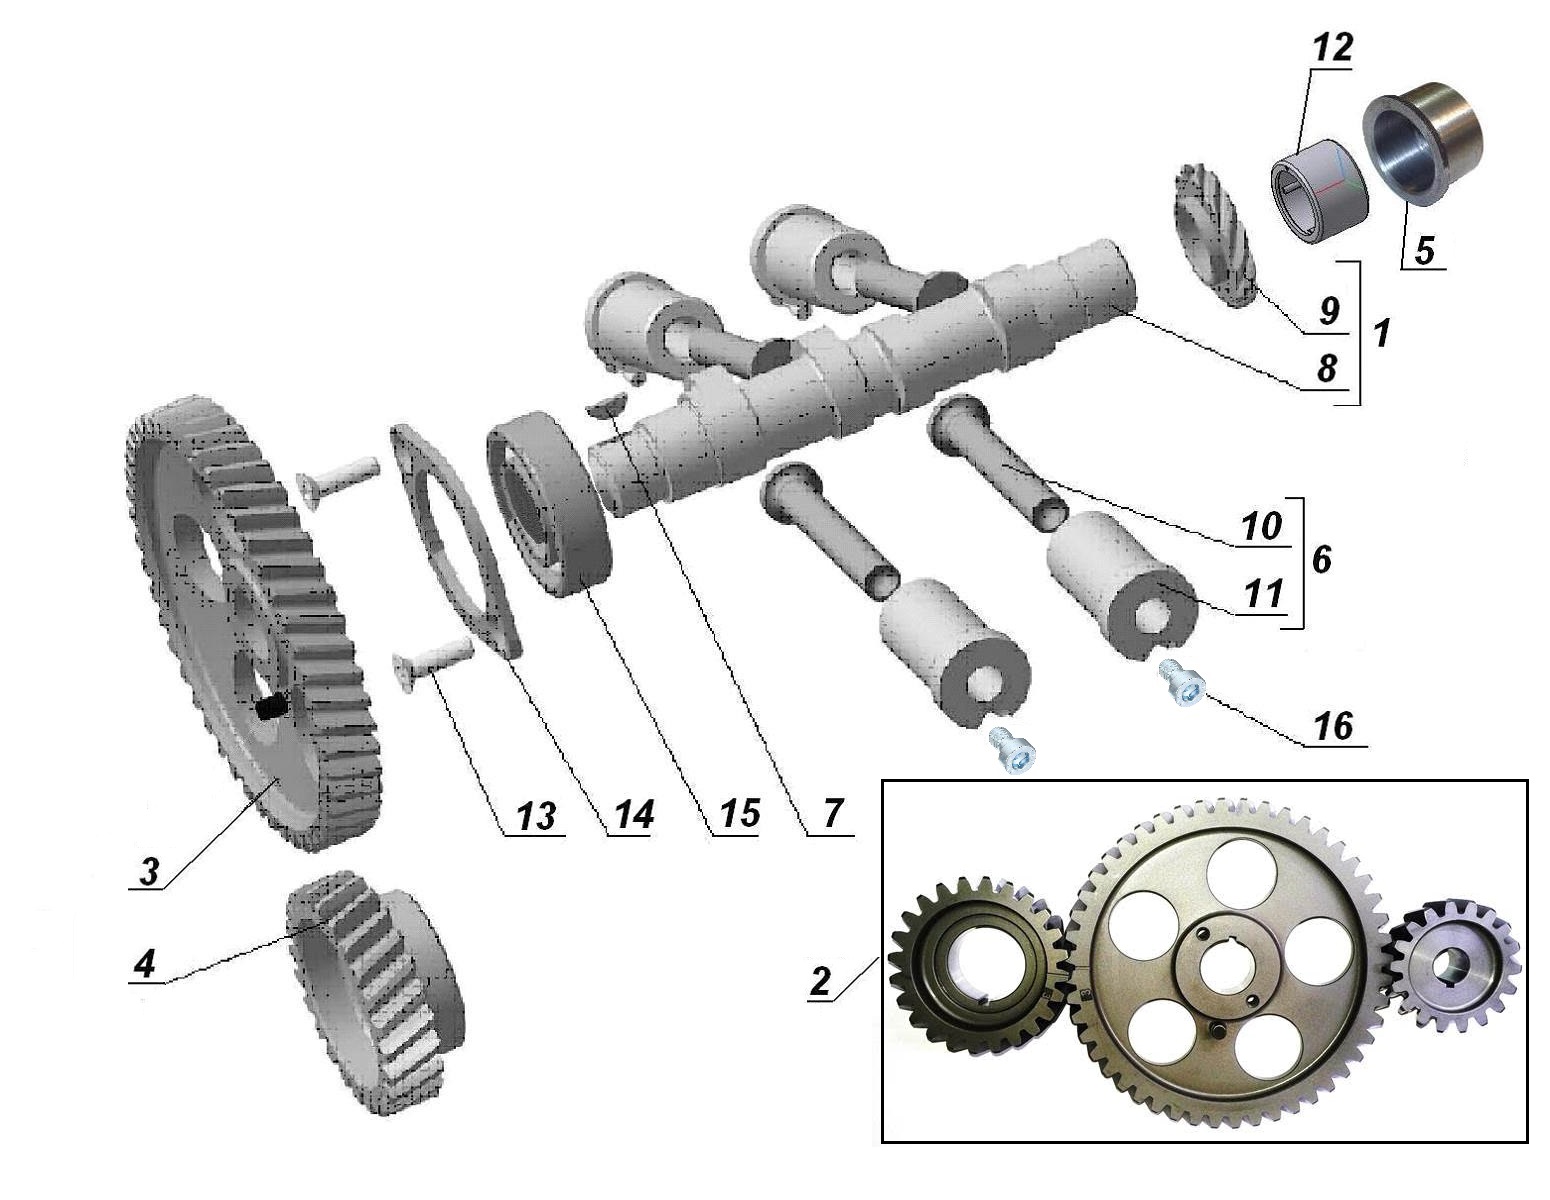 Camshaft and valve train components